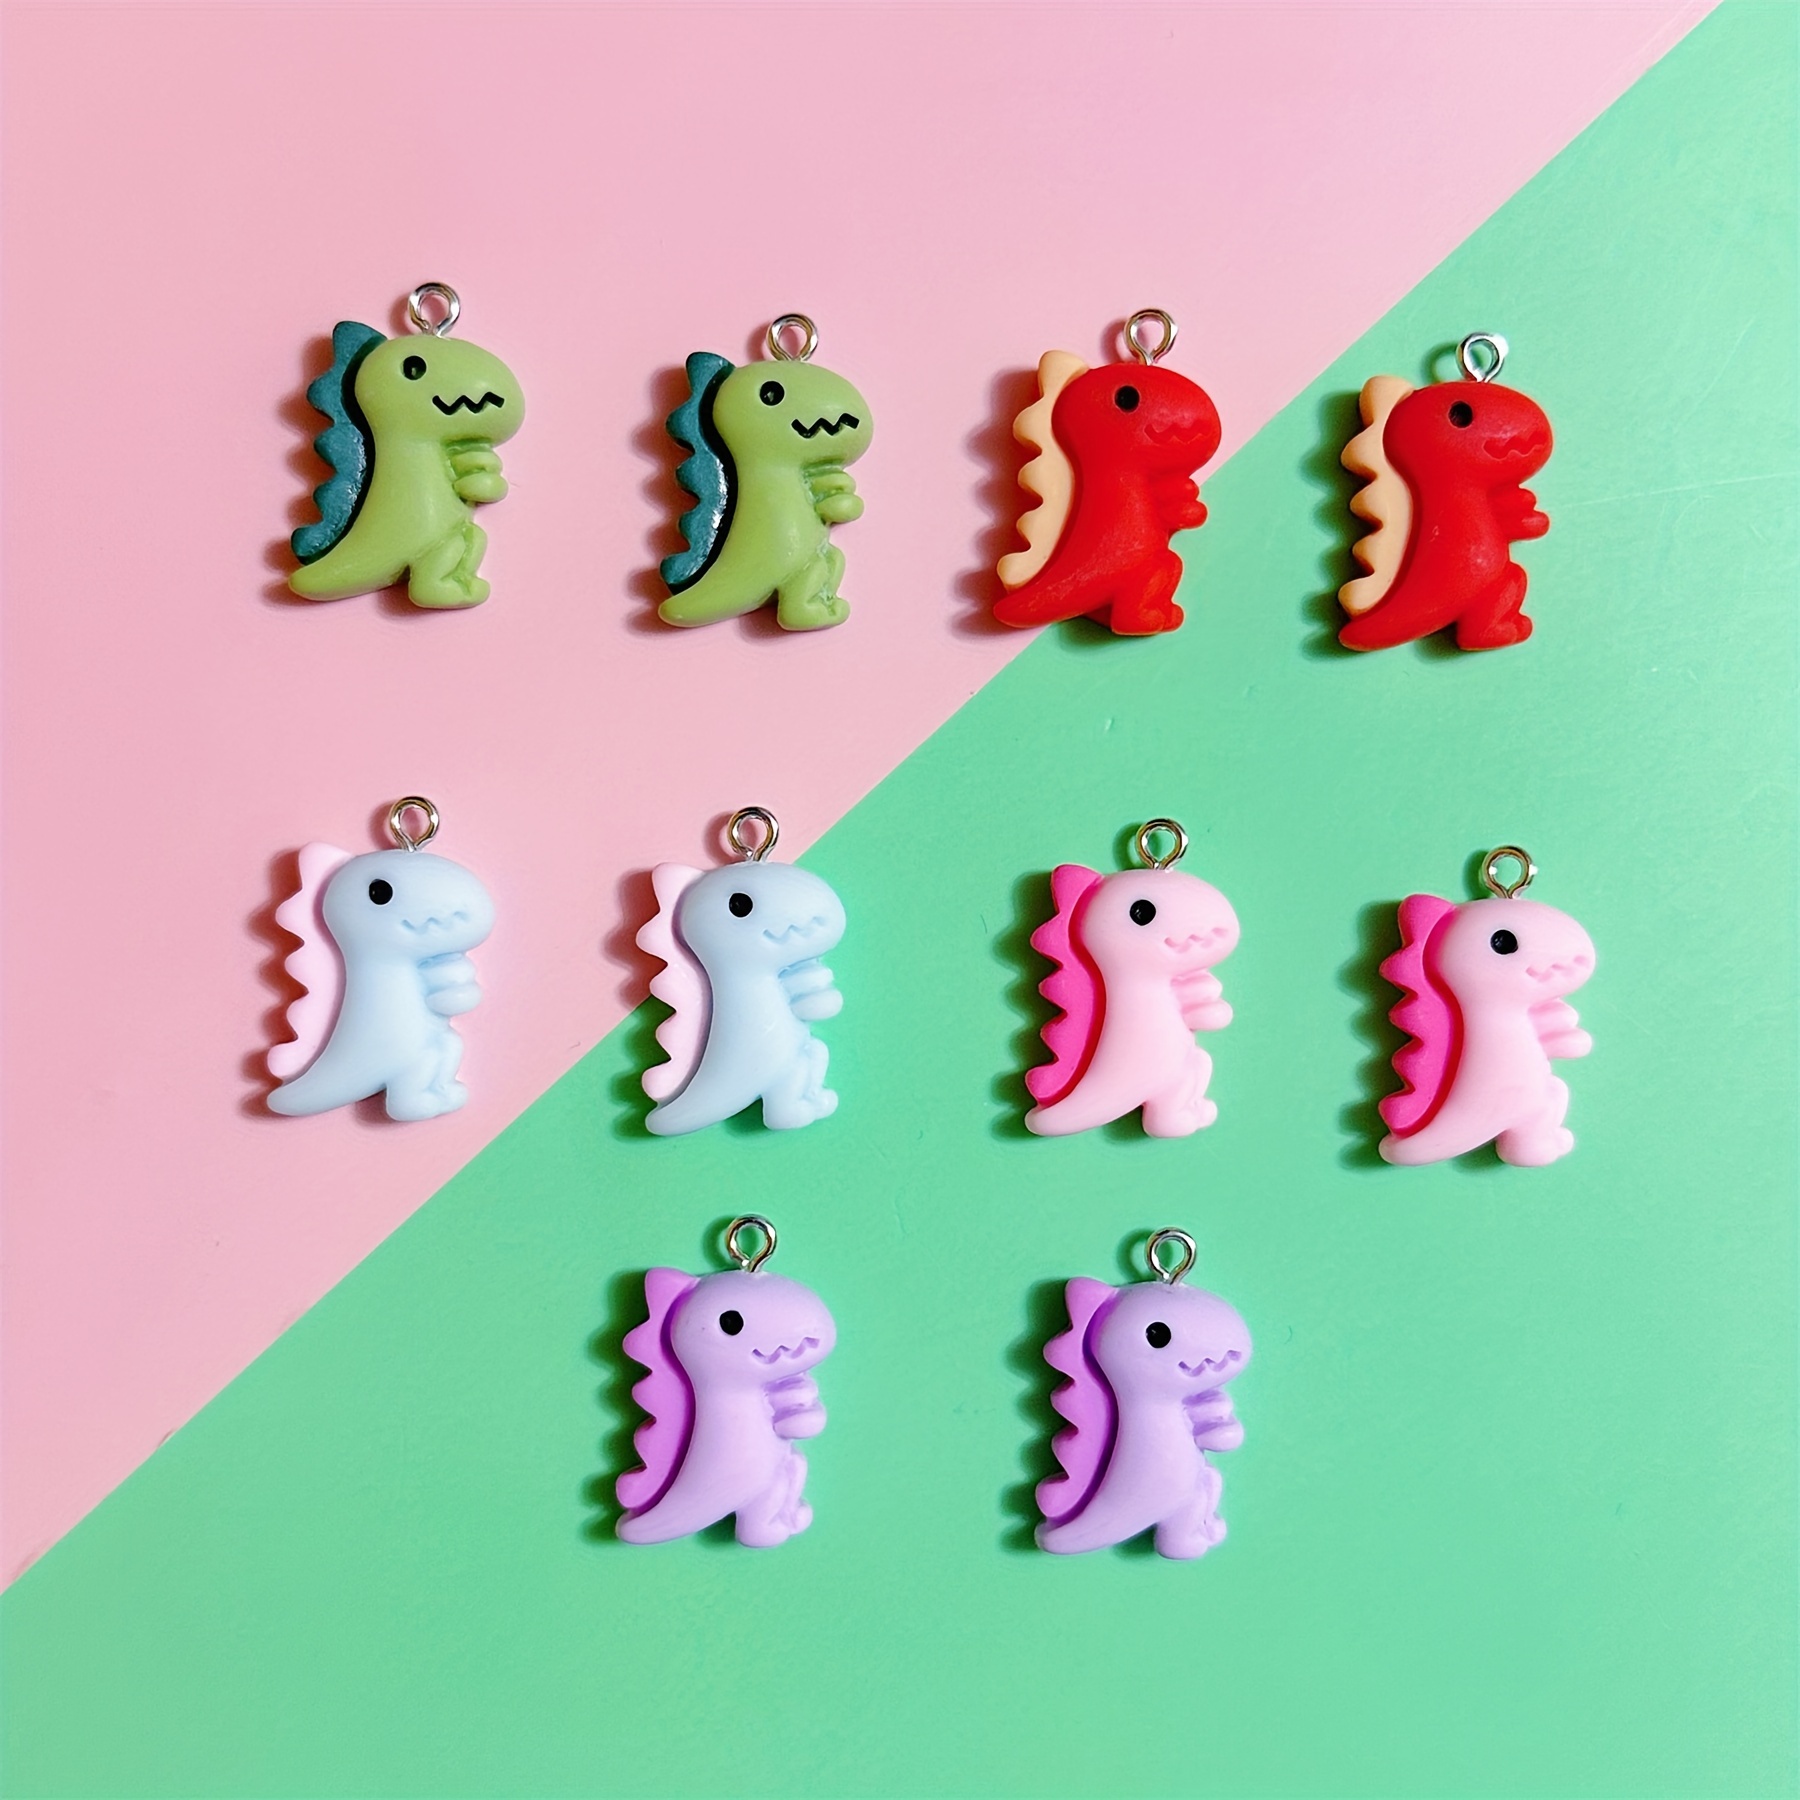 

10pcs/pack Assorted Color Cartoon Dinosaur Handmade Pendants, Resin Jewelry Charms For Earrings, Necklaces, Bracelets, Keychains And Bag Accessories, Creative Gifts For Diy Crafts